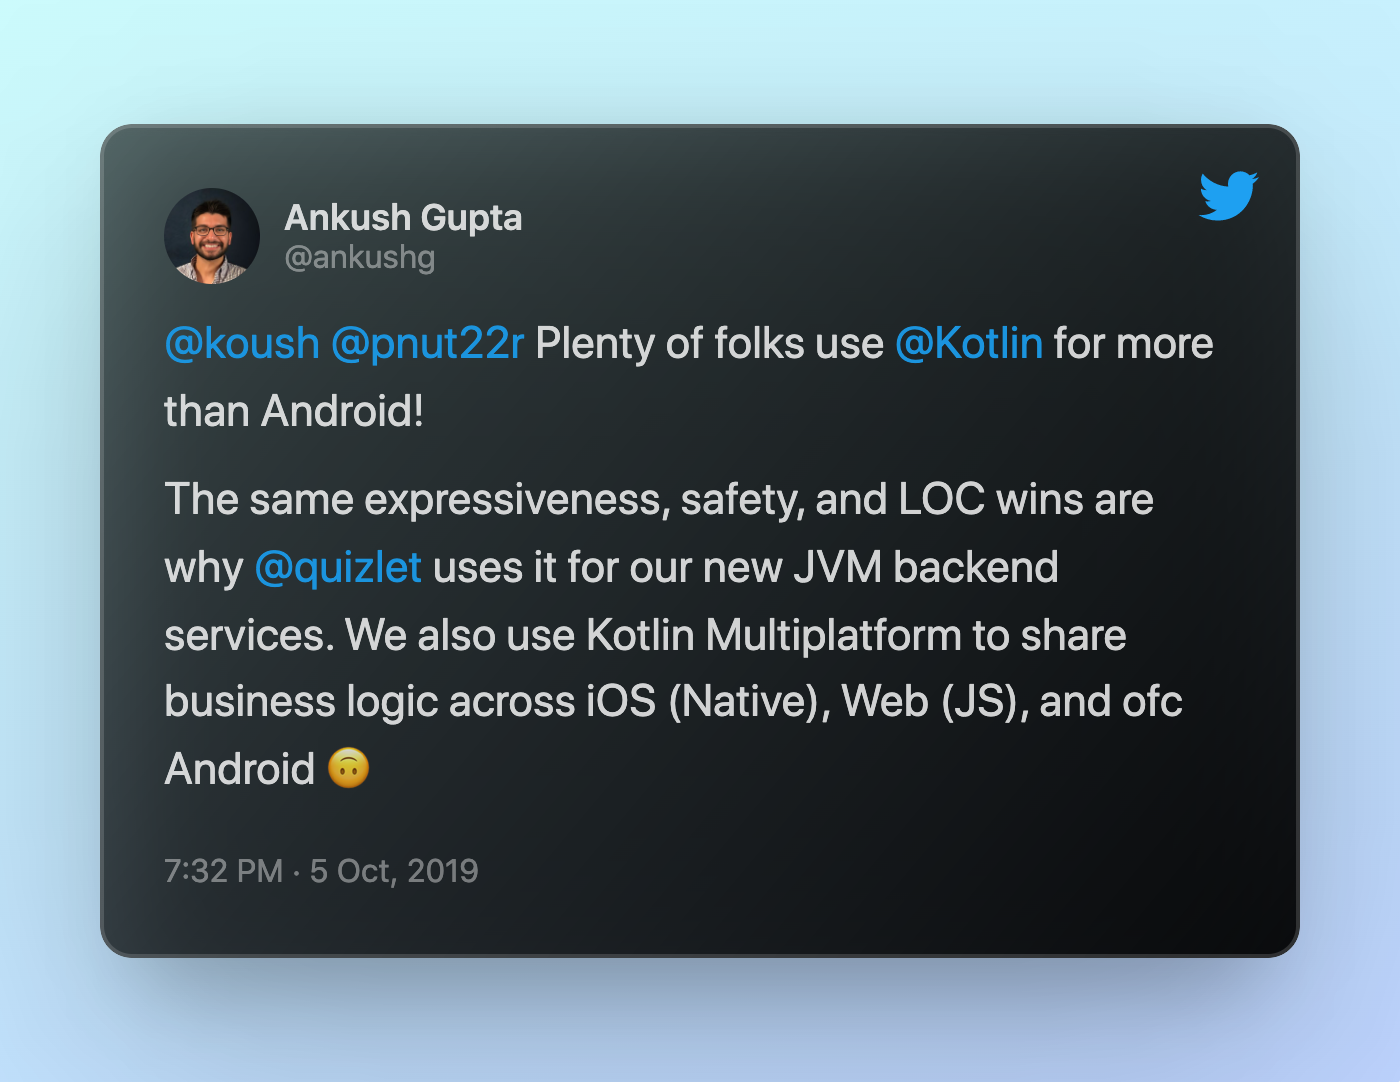 Tweet by Ankush Gupta including the sentence: "We also use Kotlin Multiplatform to share business logic across iOS (Native), Web (JS), and ofc Android"